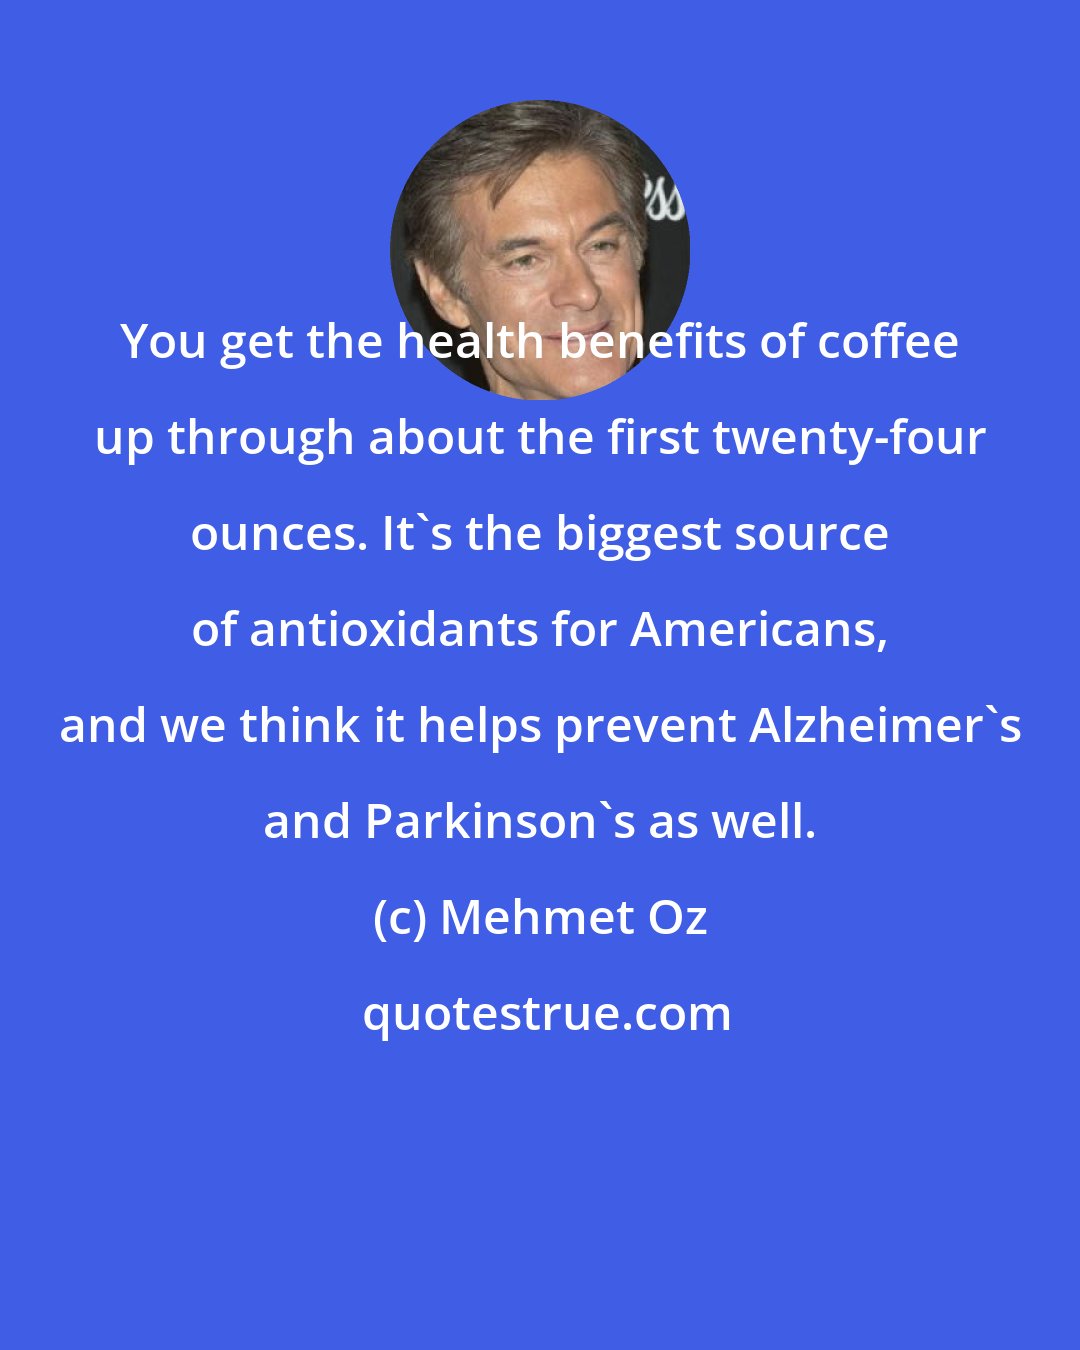 Mehmet Oz: You get the health benefits of coffee up through about the first twenty-four ounces. It's the biggest source of antioxidants for Americans, and we think it helps prevent Alzheimer's and Parkinson's as well.